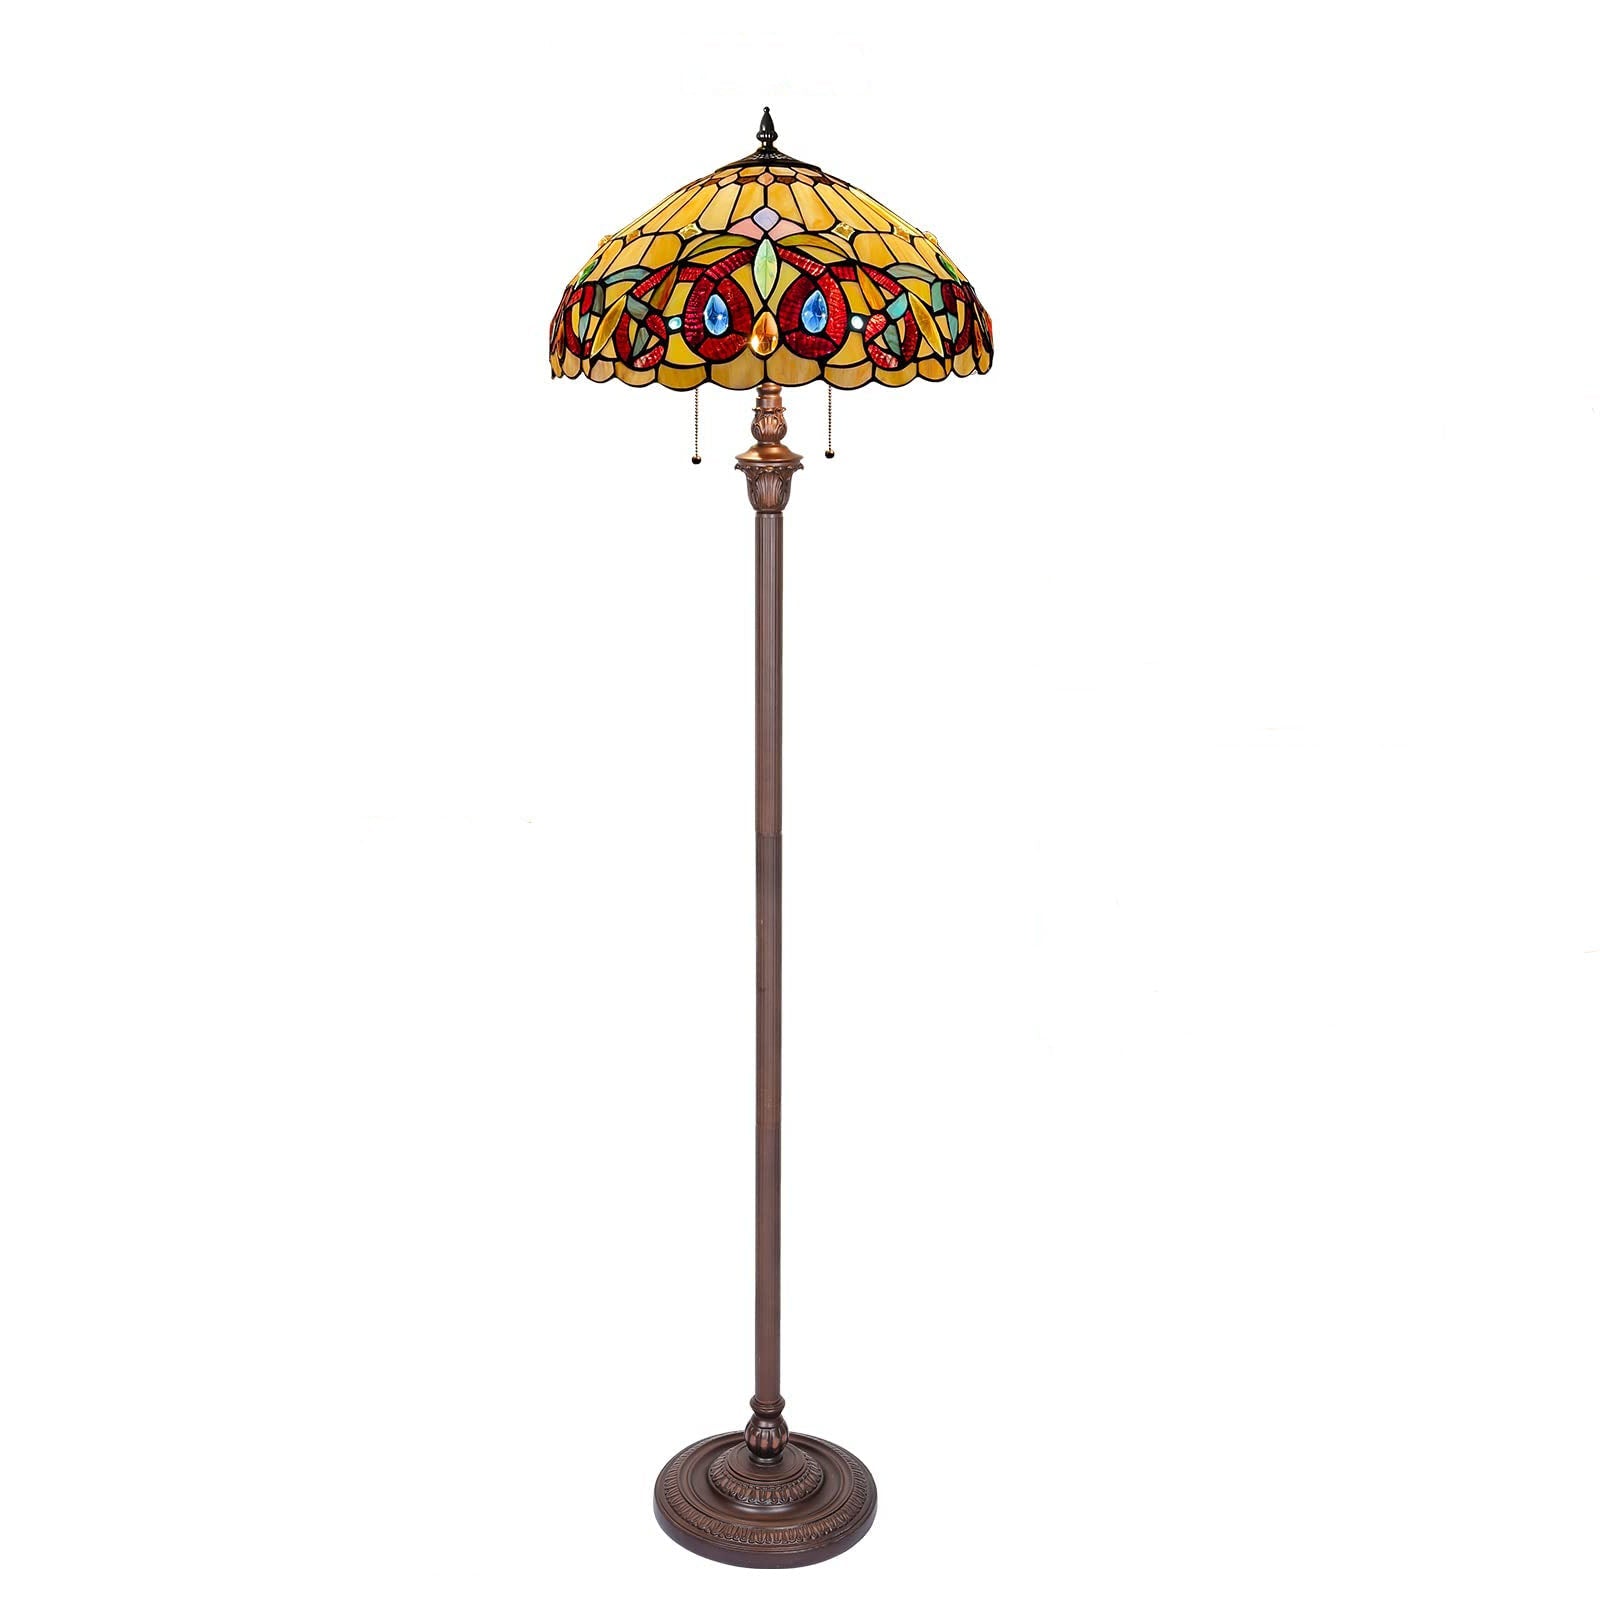 Capulina Tiffany Floor Lamp 2-Light 16 Wide Antique Victorian Style Stained Glass Industrial Dark Bronze Pole Standing Reading Light for Living Room Bedroom Office